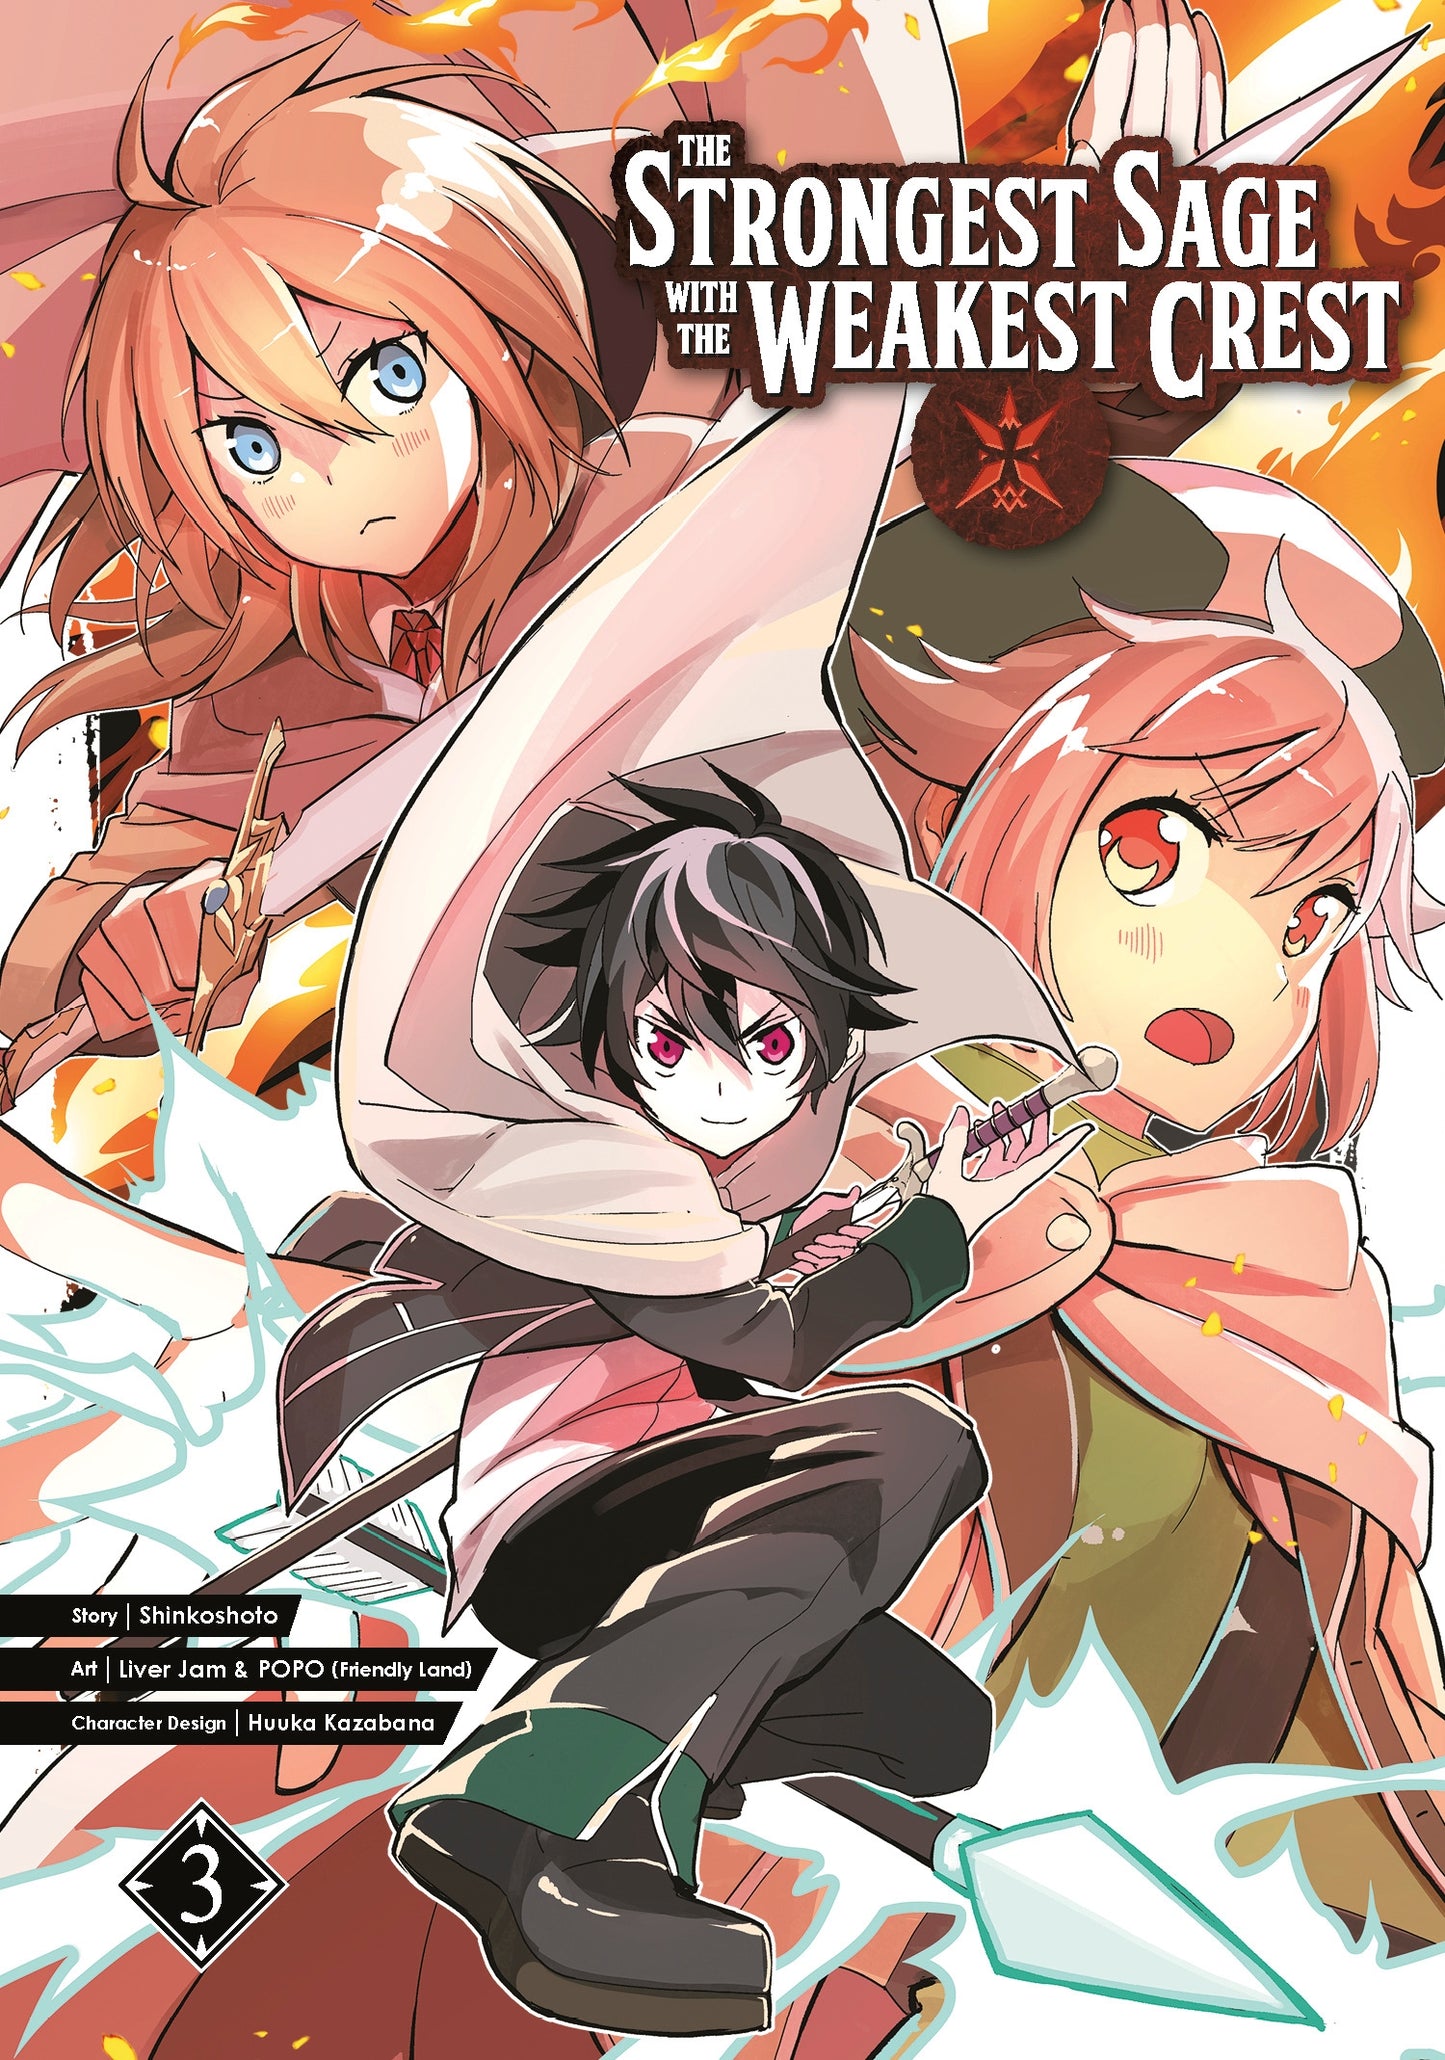 The Strongest Sage with the Weakest Crest 3 - Manga Warehouse